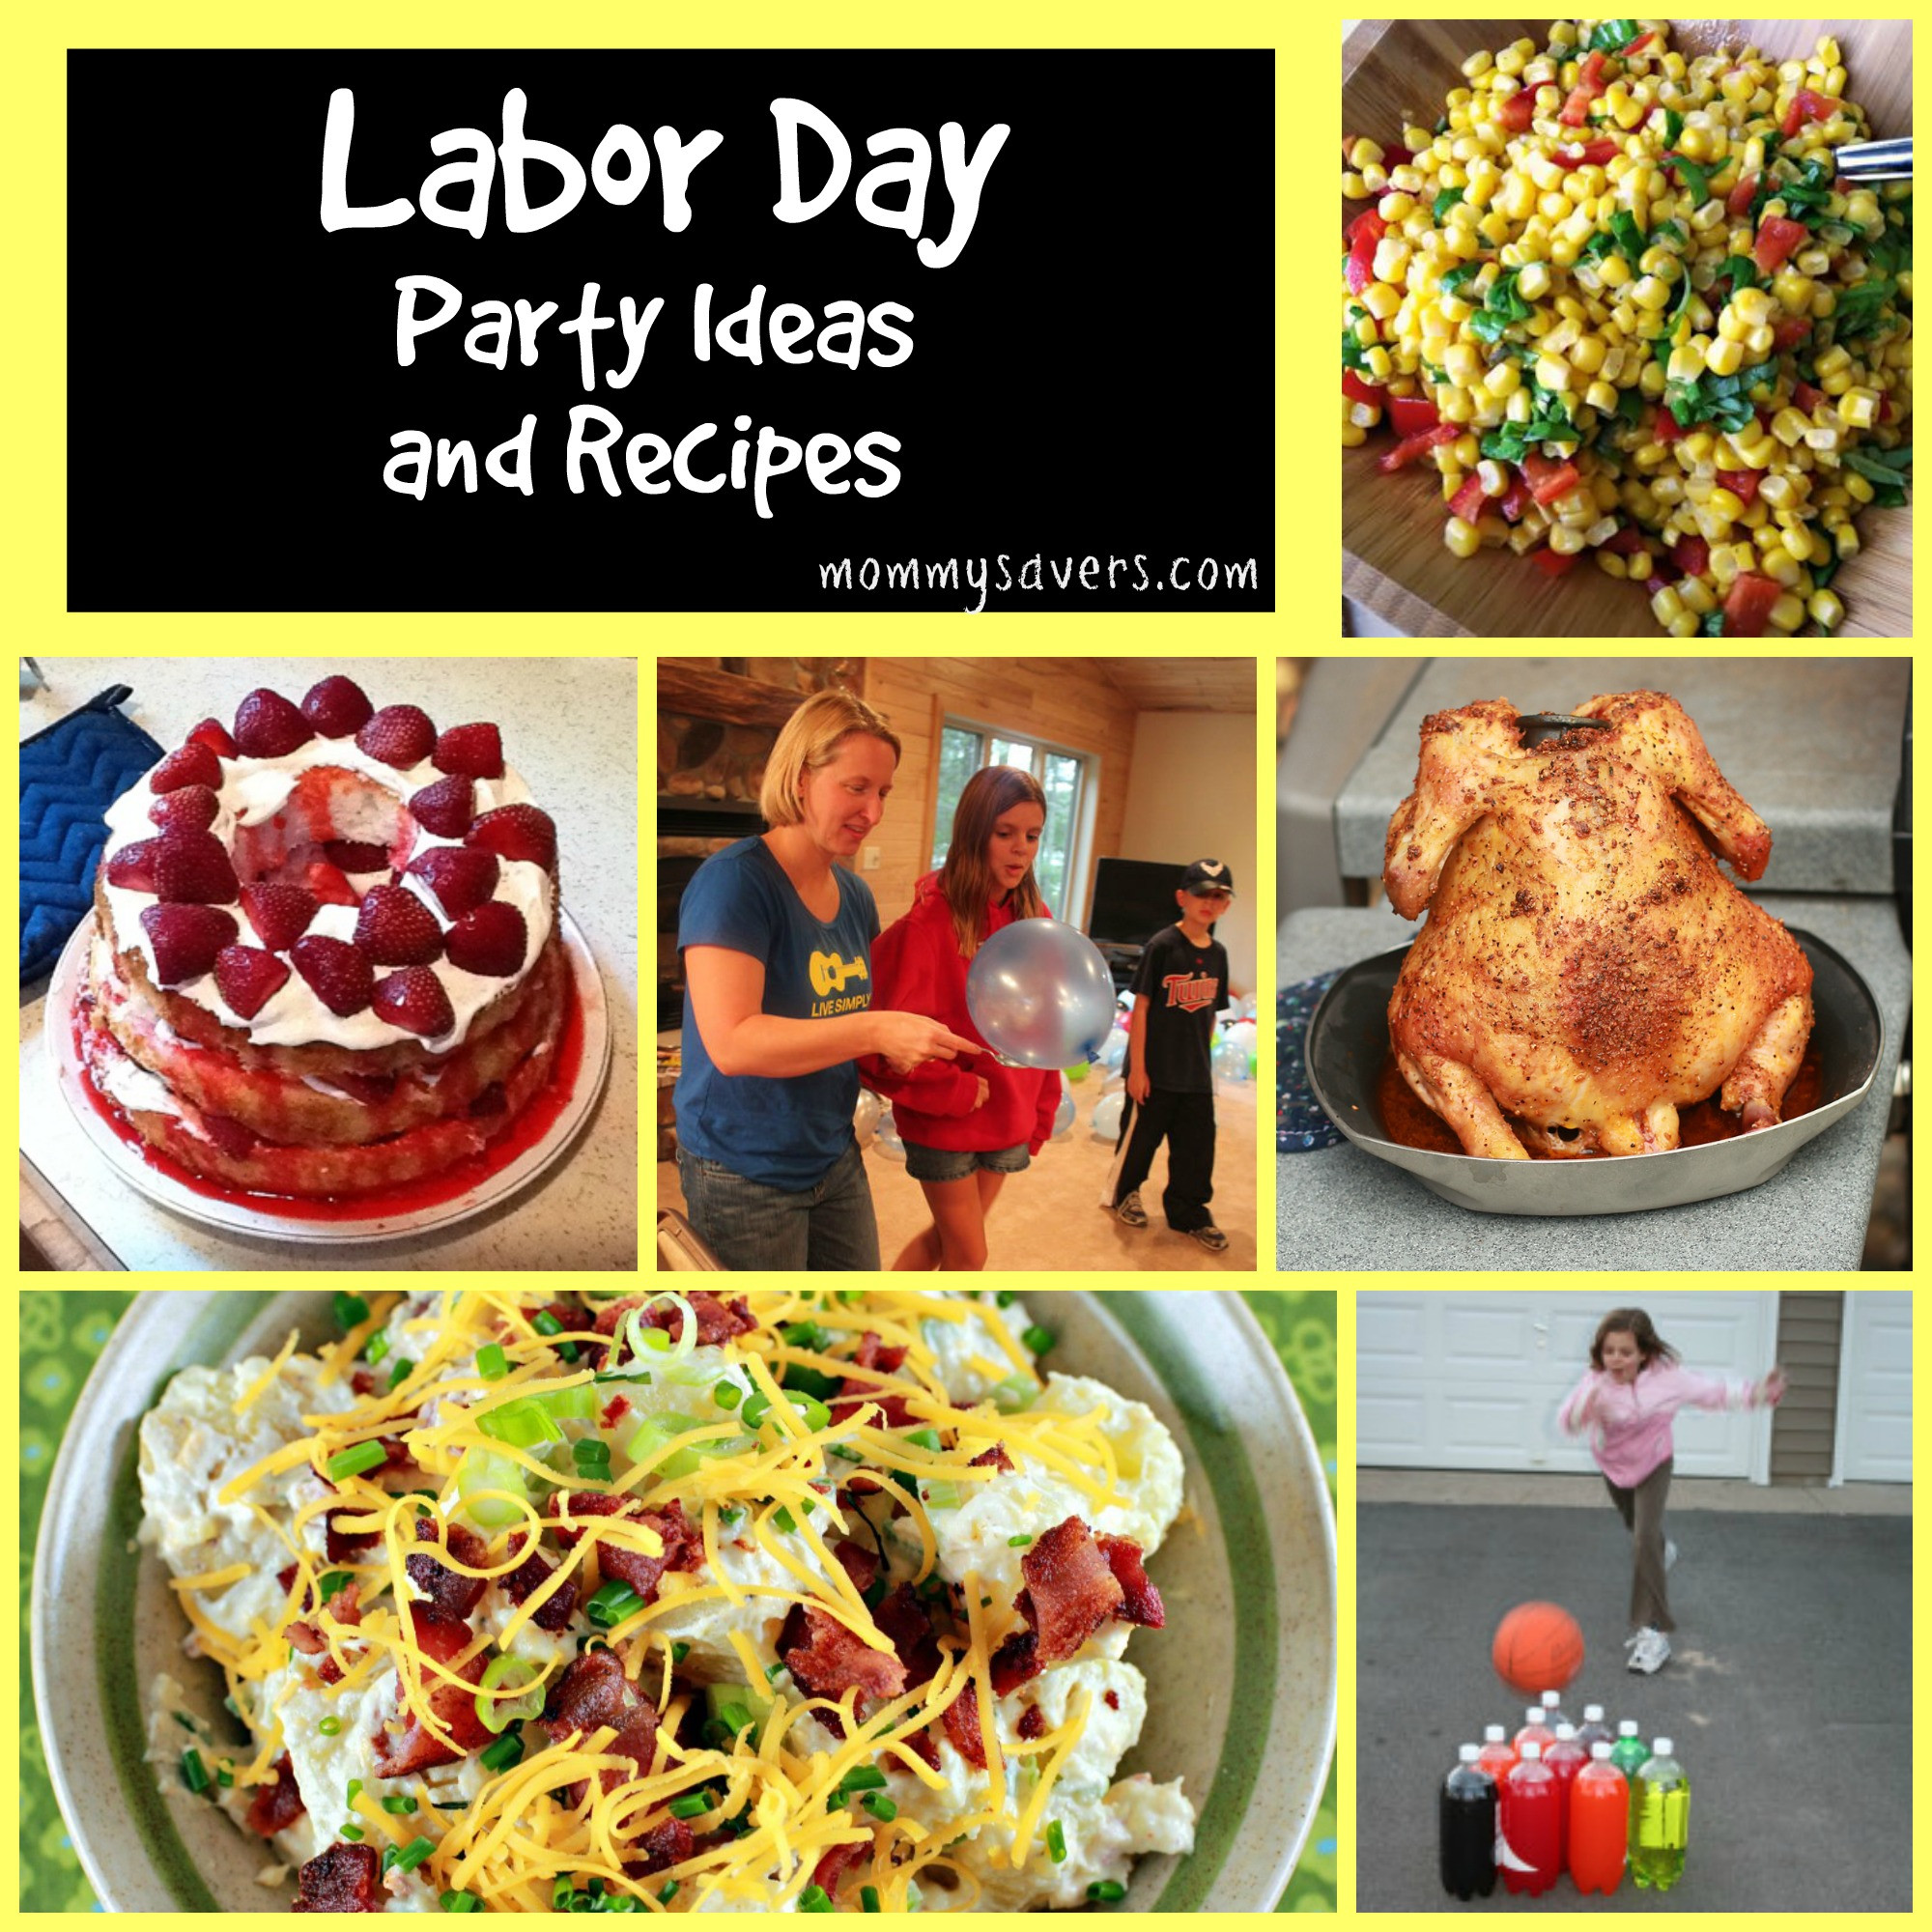 Labor Day Food Ideas
 Labor Day Party Ideas and 25 Recipes Mommysavers